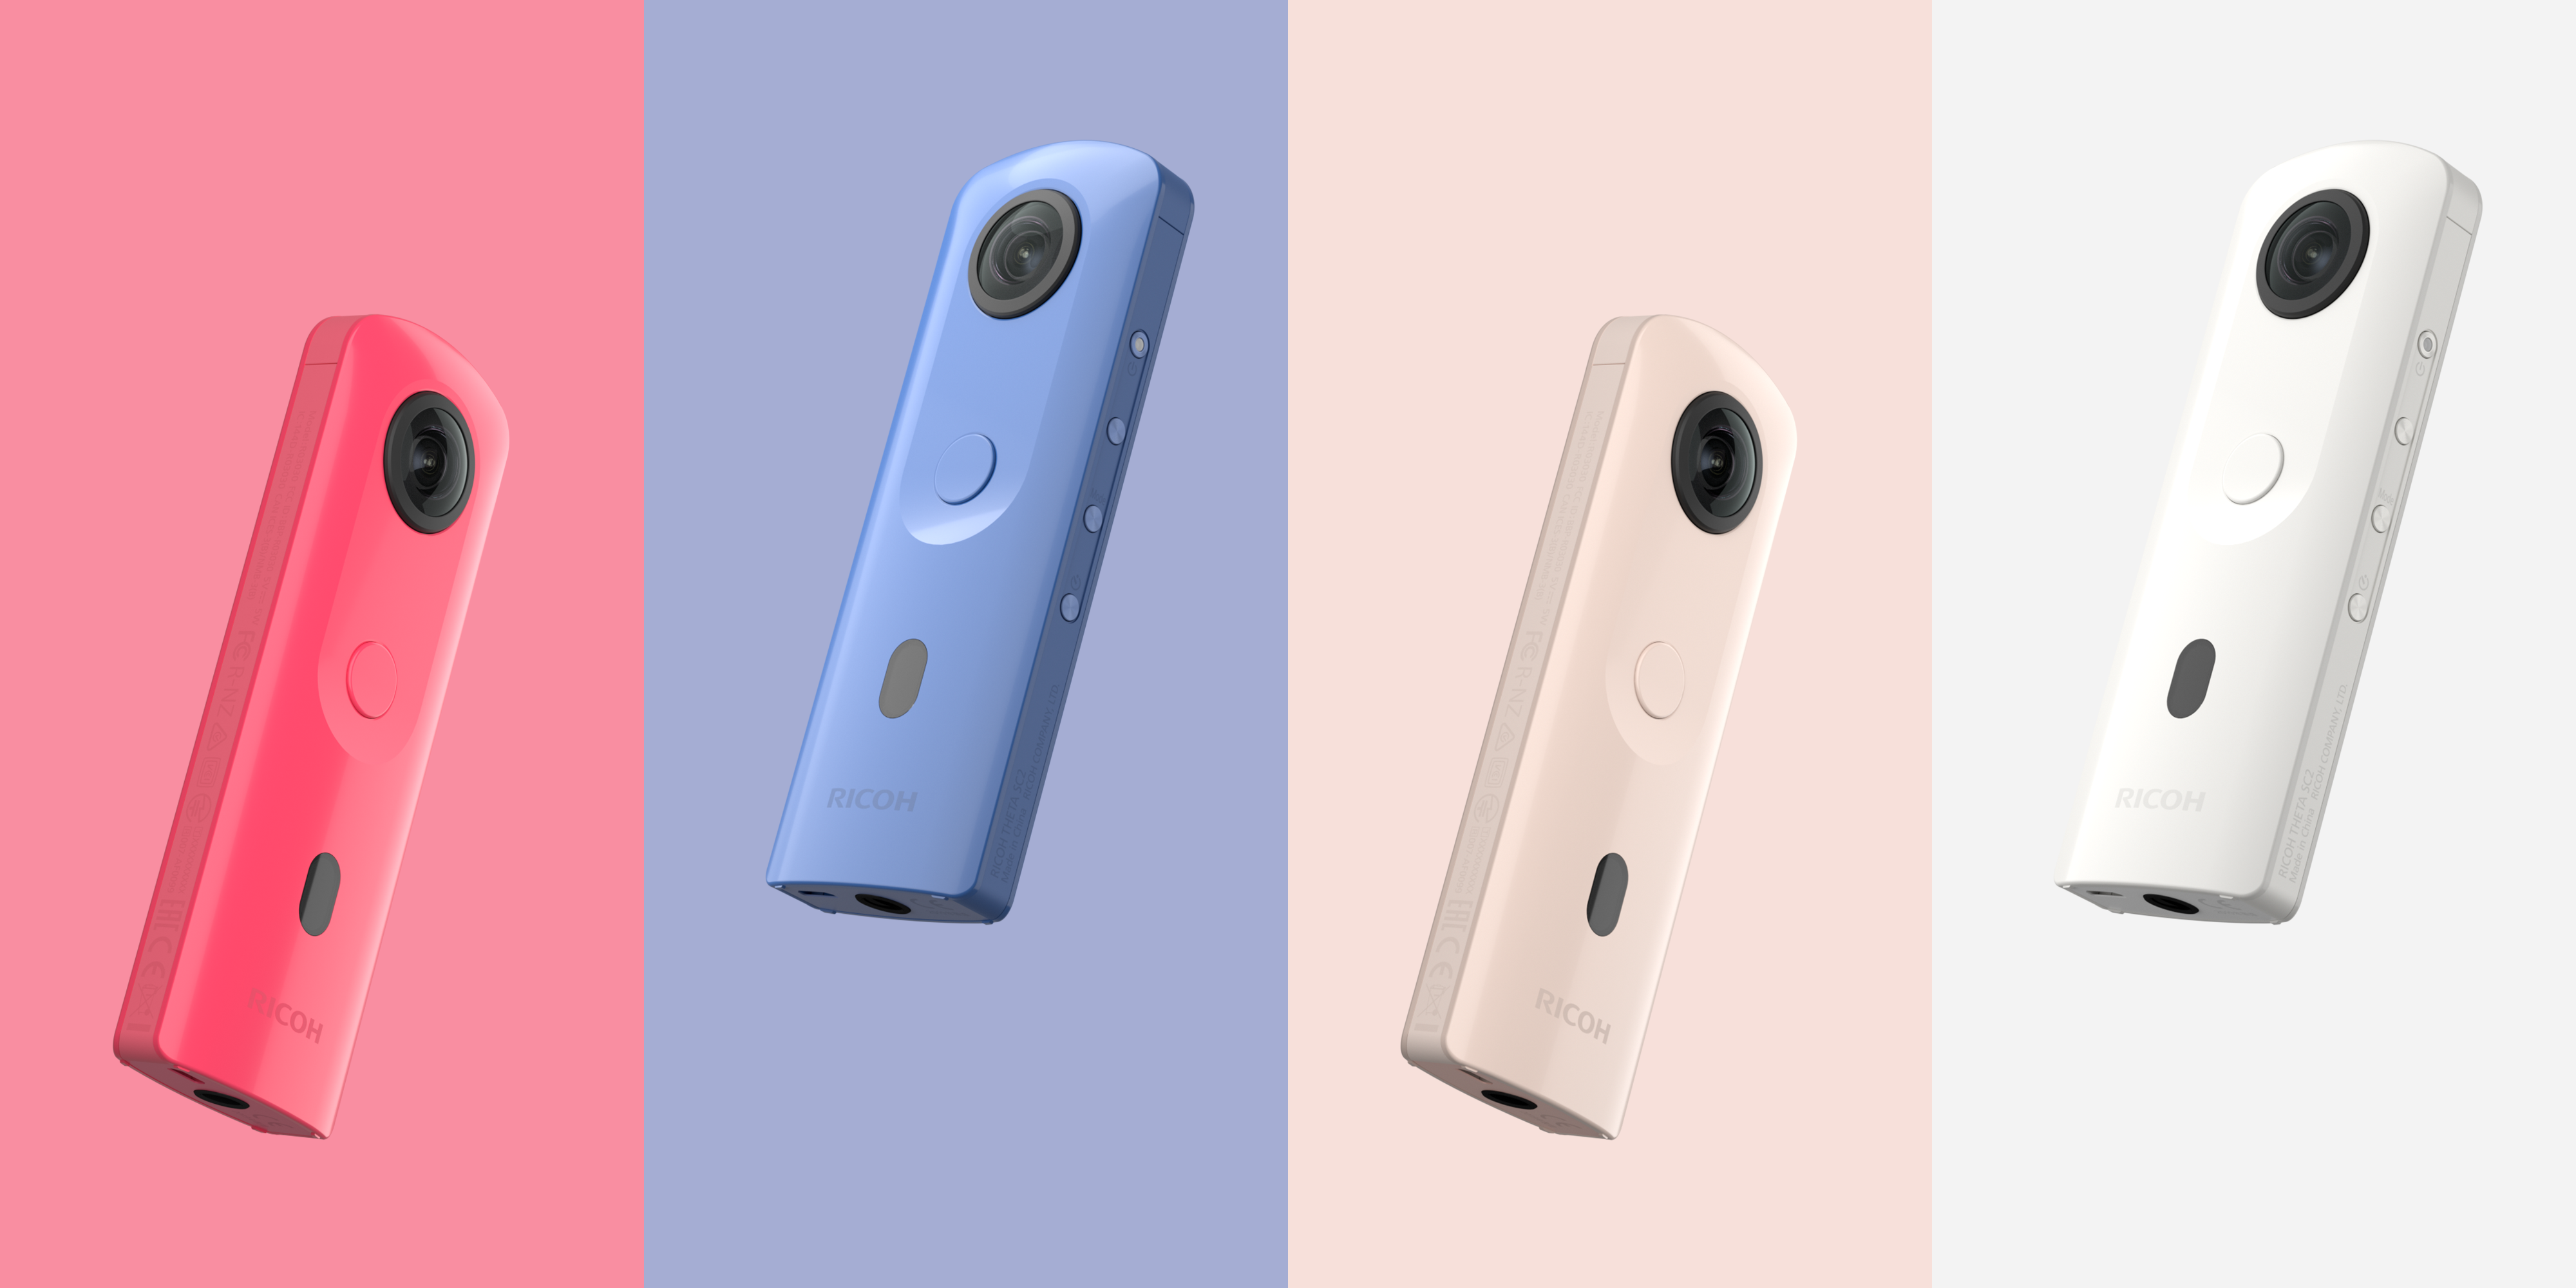 Ricoh Theta SC2 cameras in pink, blue, beige, and white